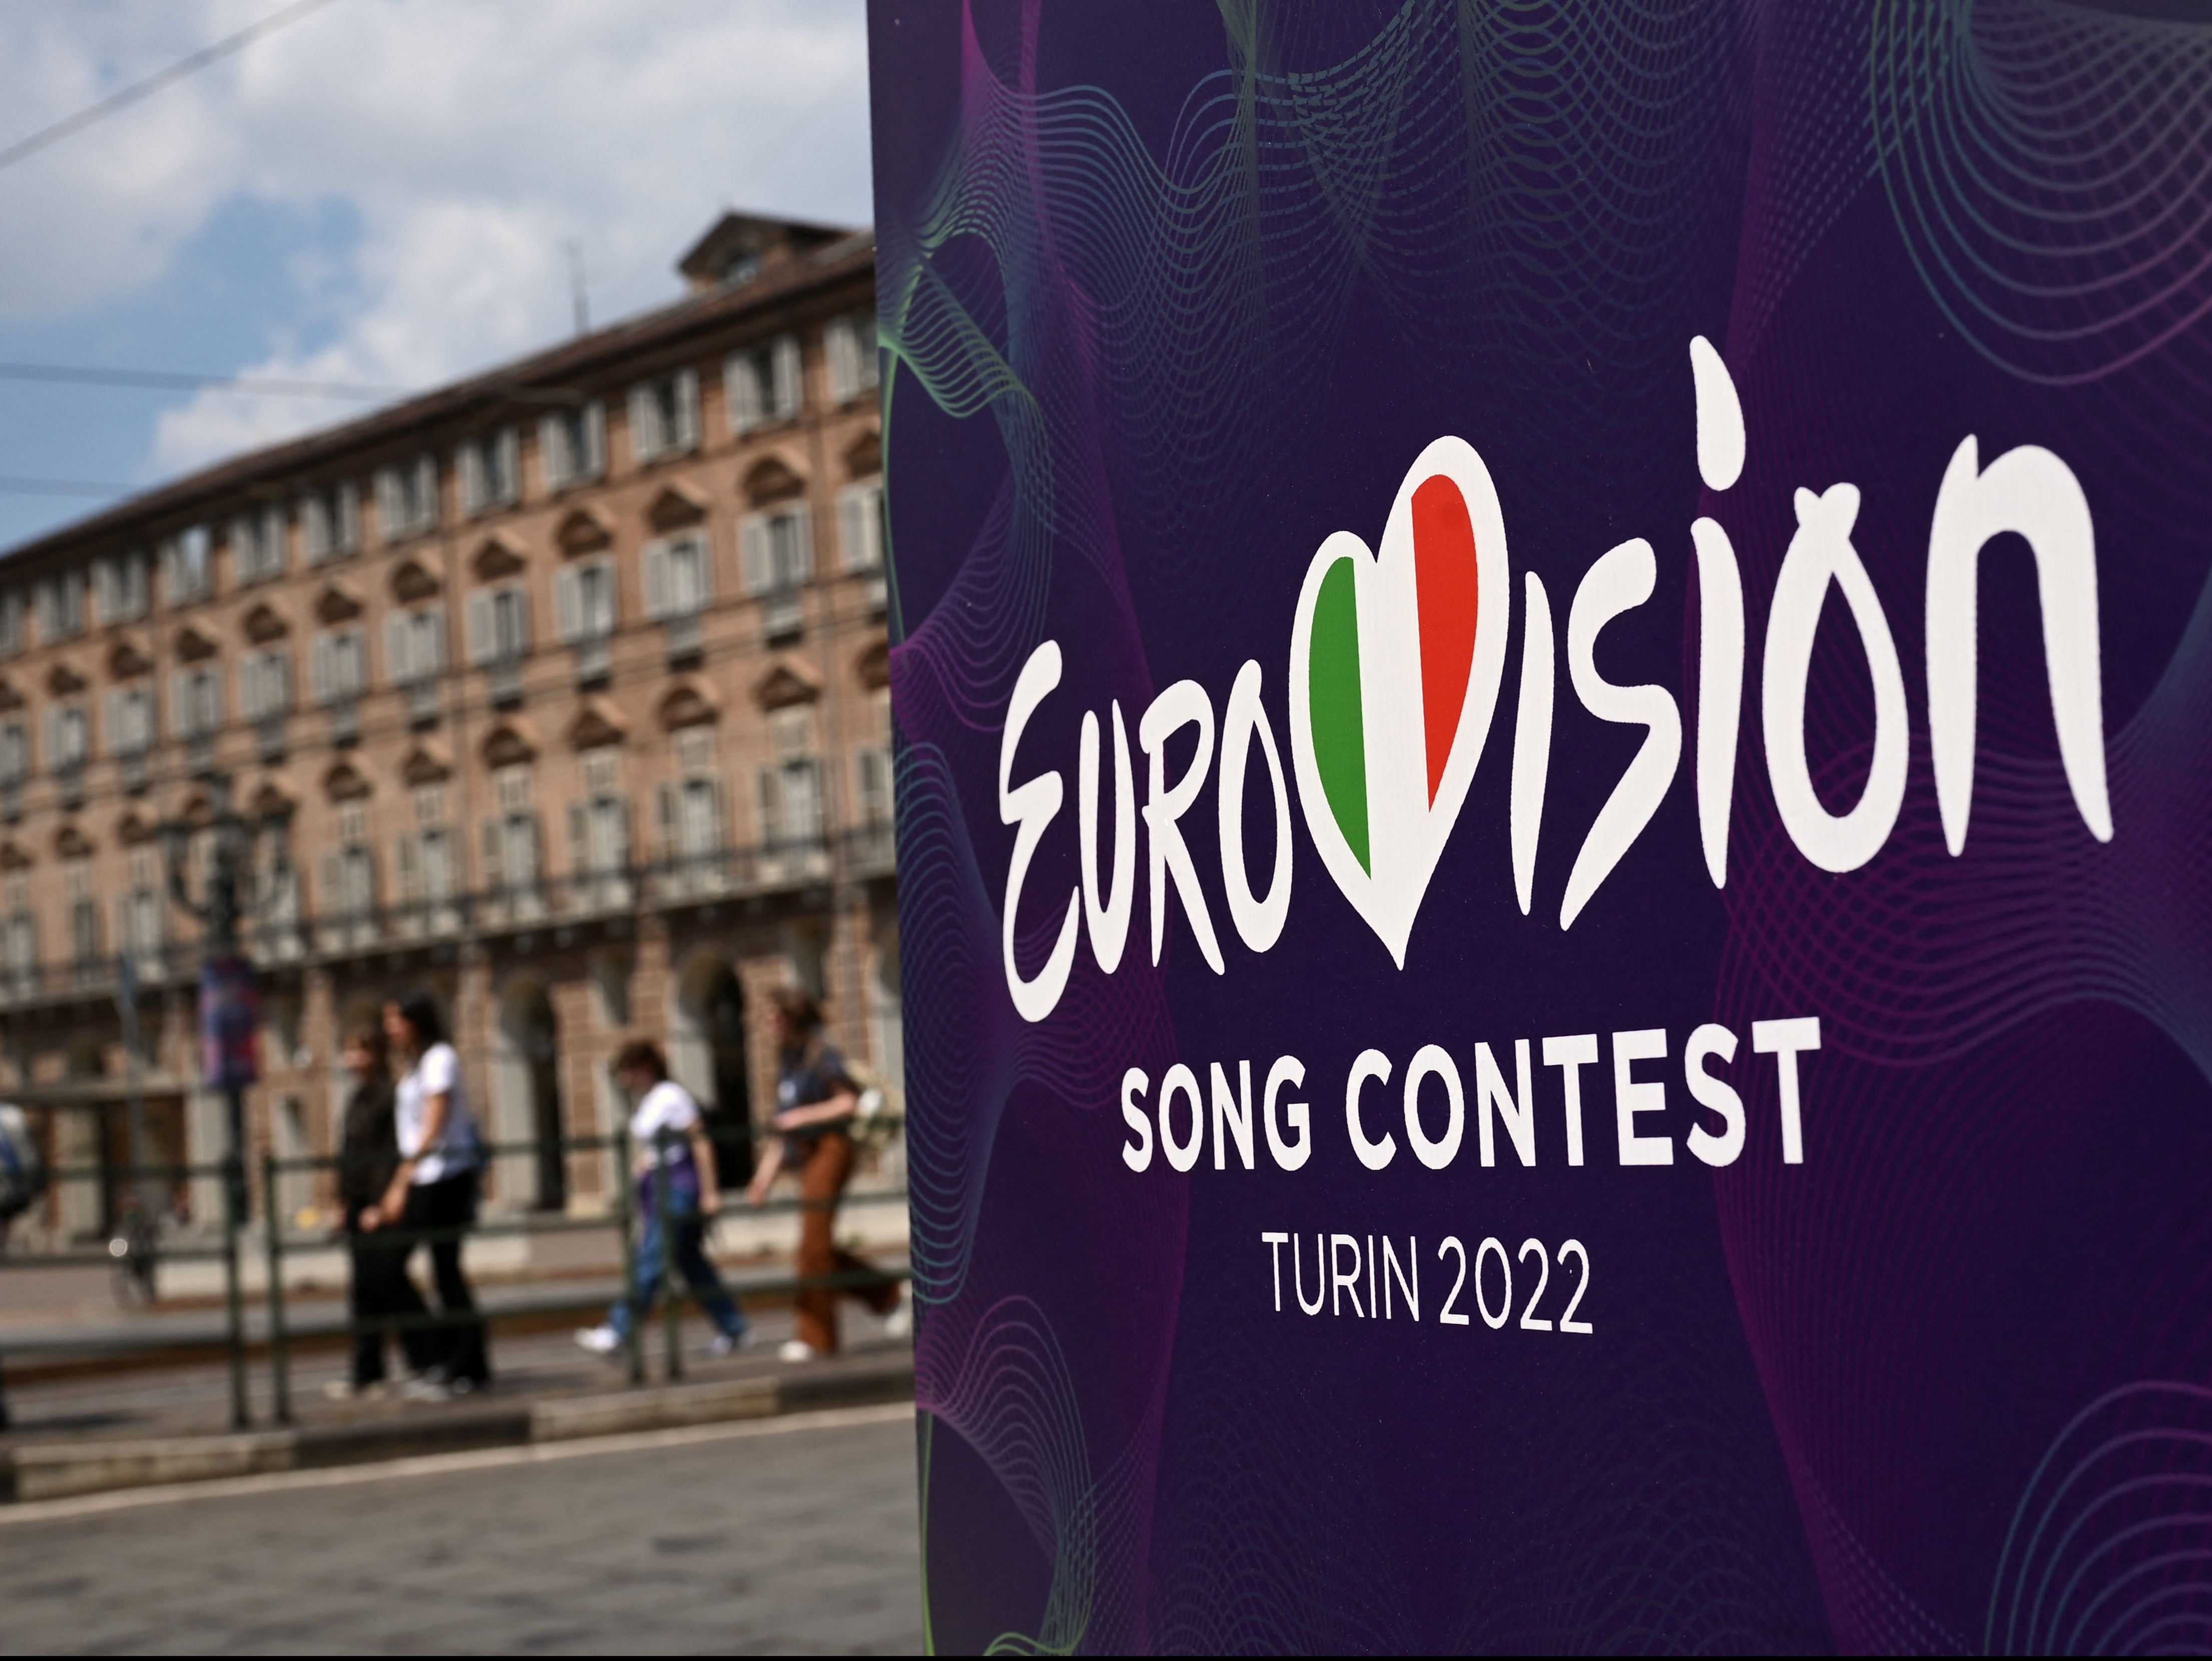 The Eurovision Song Contest is taking place in Turin this year